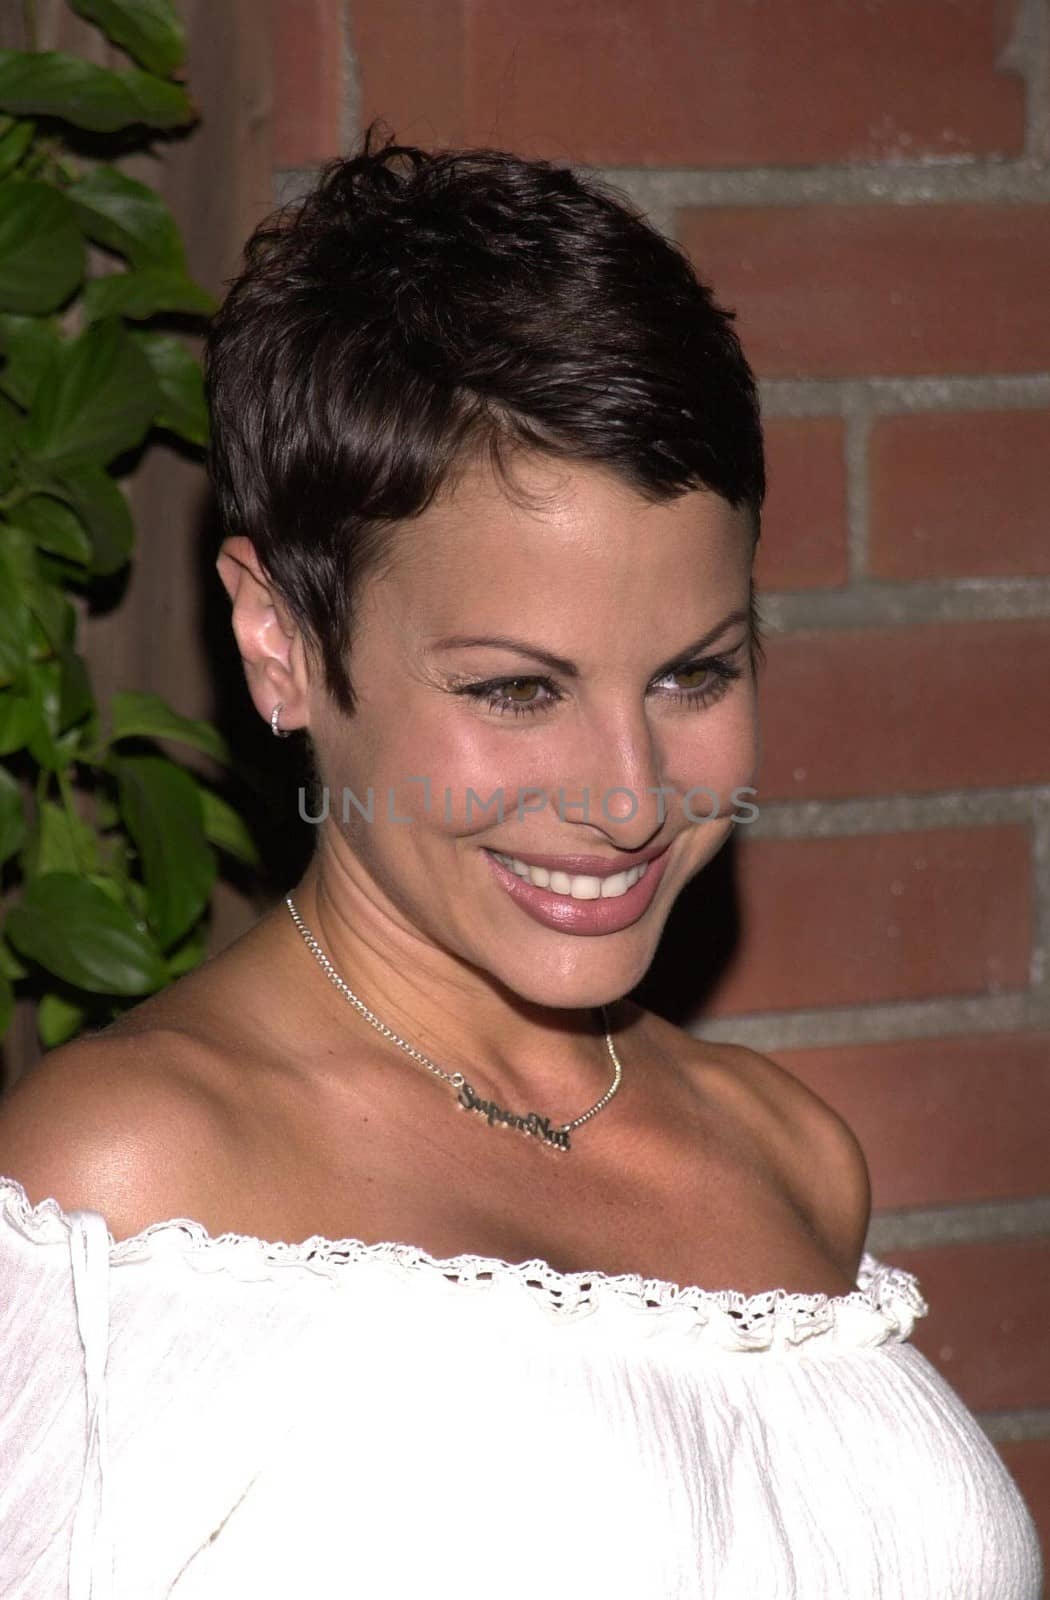 Natalie Raitano at the launch party for Eastwood Ranch's new lifestyle brand with "Denim Tapas and Tequila" held at Chadwick, Beverly Hills, CA 07-16-02